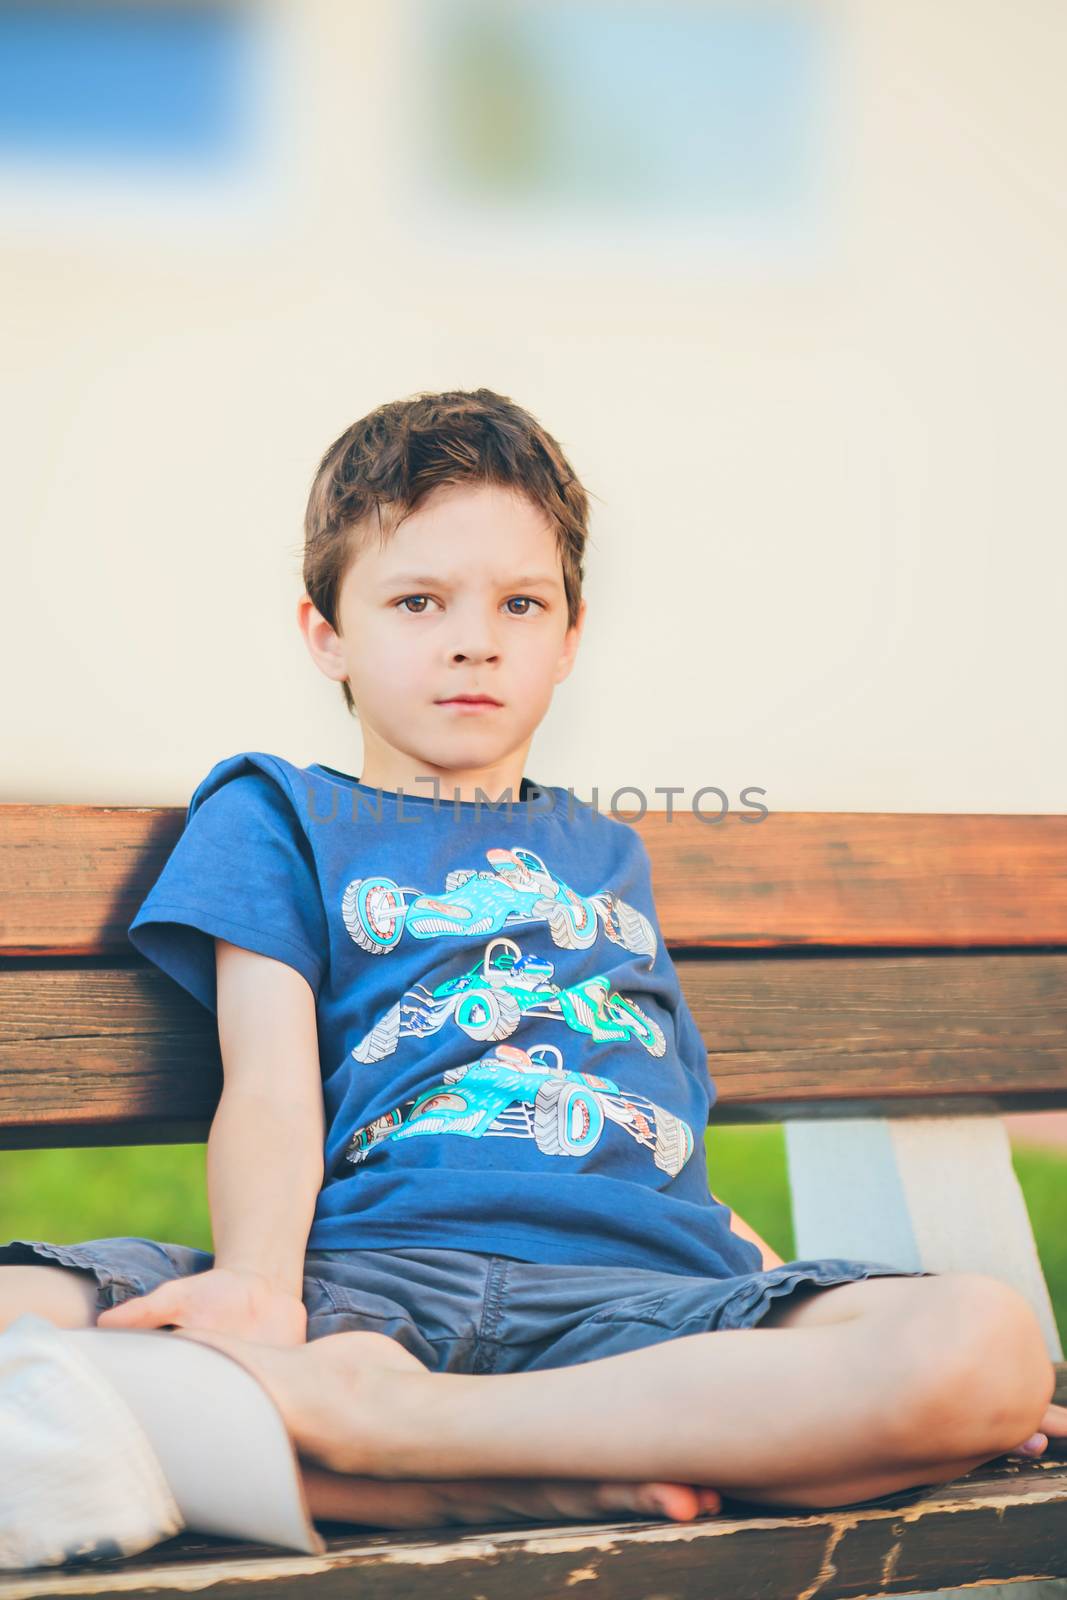 sad boy sitting on a bench and looking into the camera